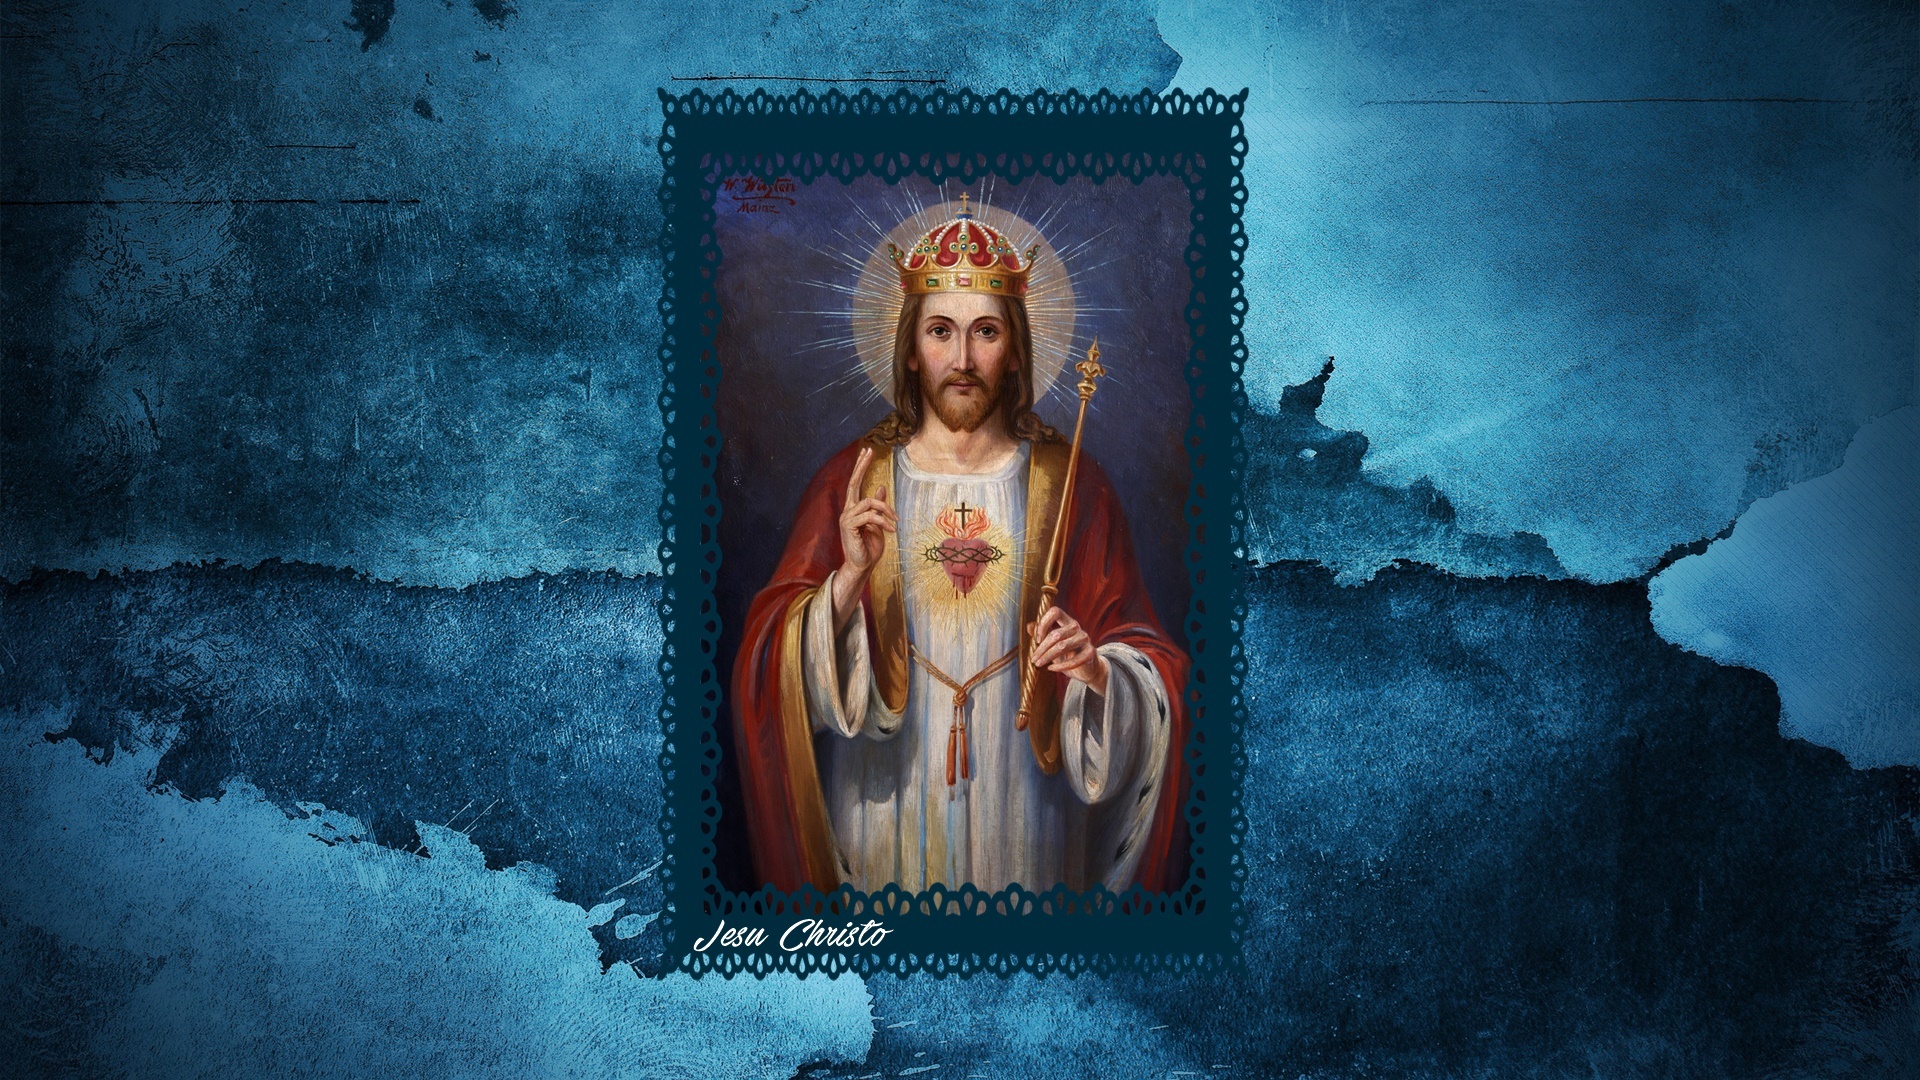 Latin Jesus Christ Picture Frames Crown Religious Christianity Blue 1920x1080